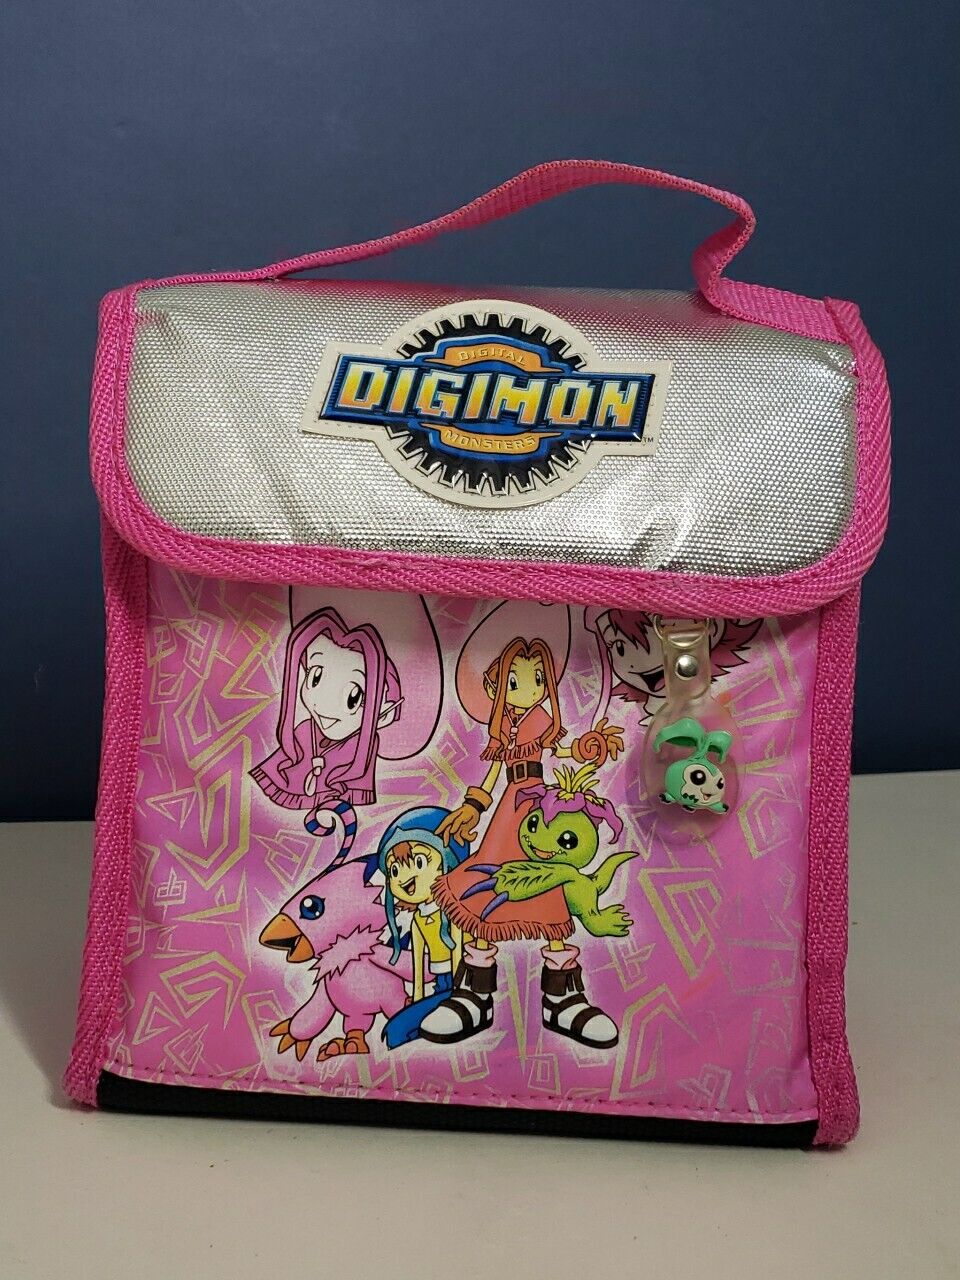 1999 Vintage Digital Digimon Monsters Insulated Lunch Bag Kids Lunchbox Pink